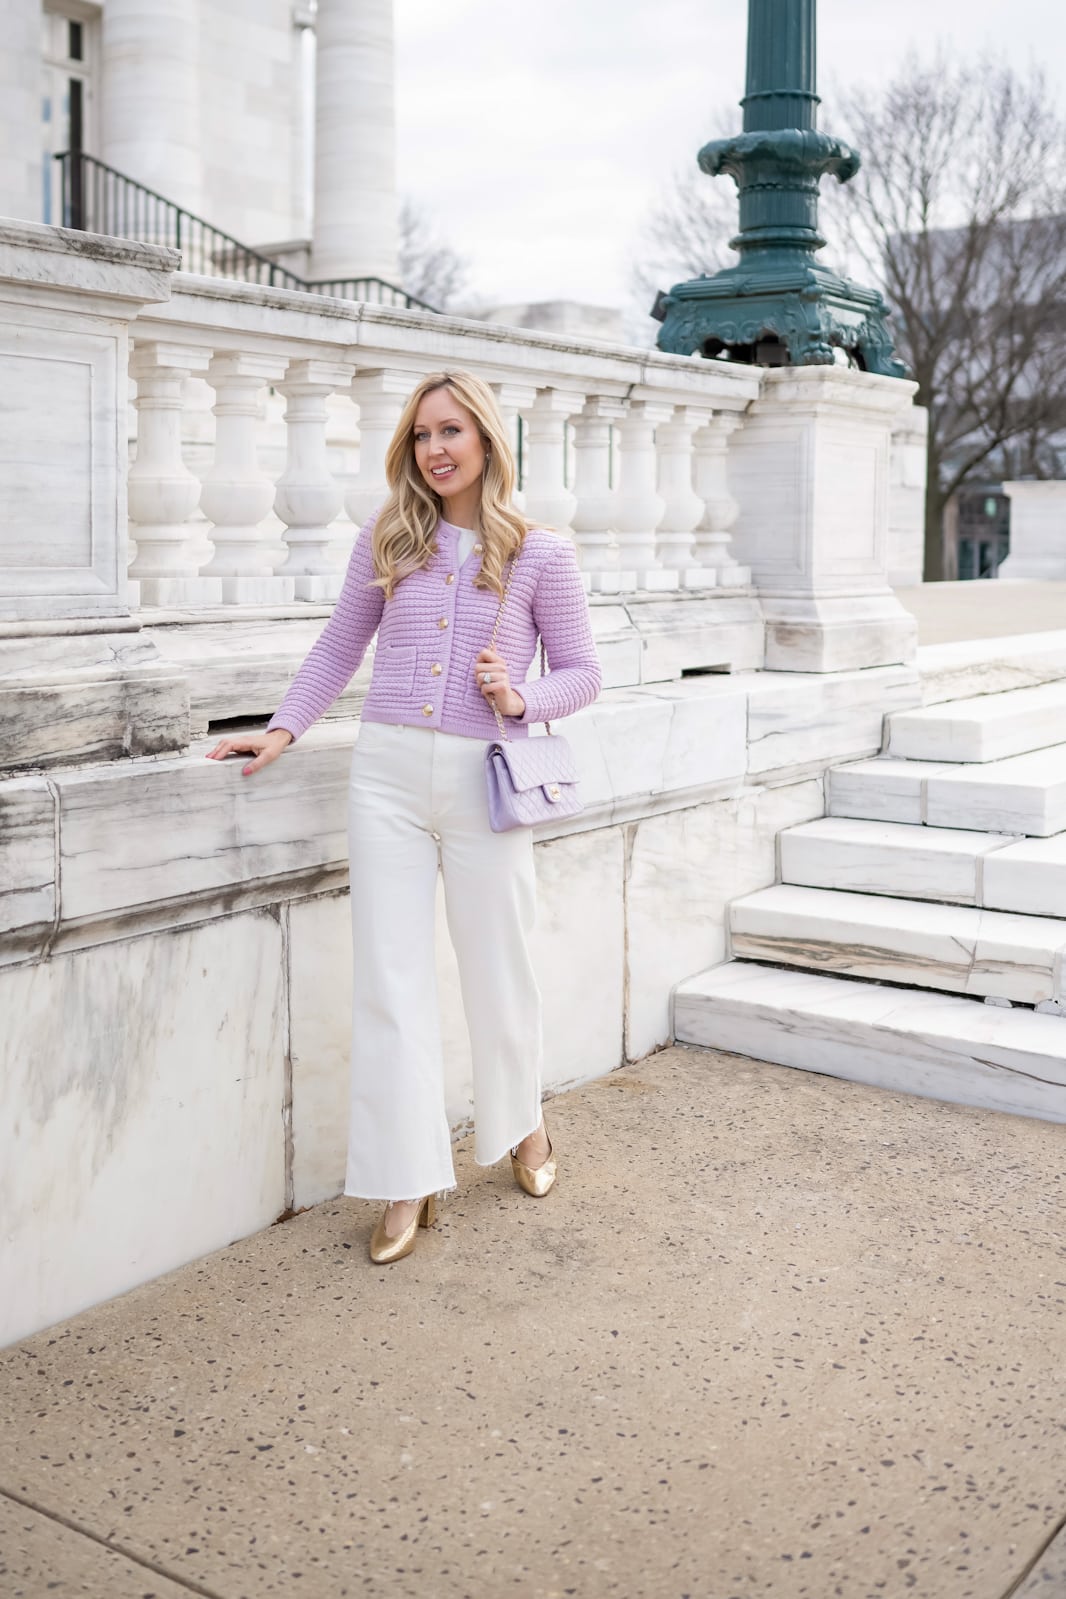 9 Shoes to Wear With Wide Leg Pants - THE FASHION HOUSE MOM